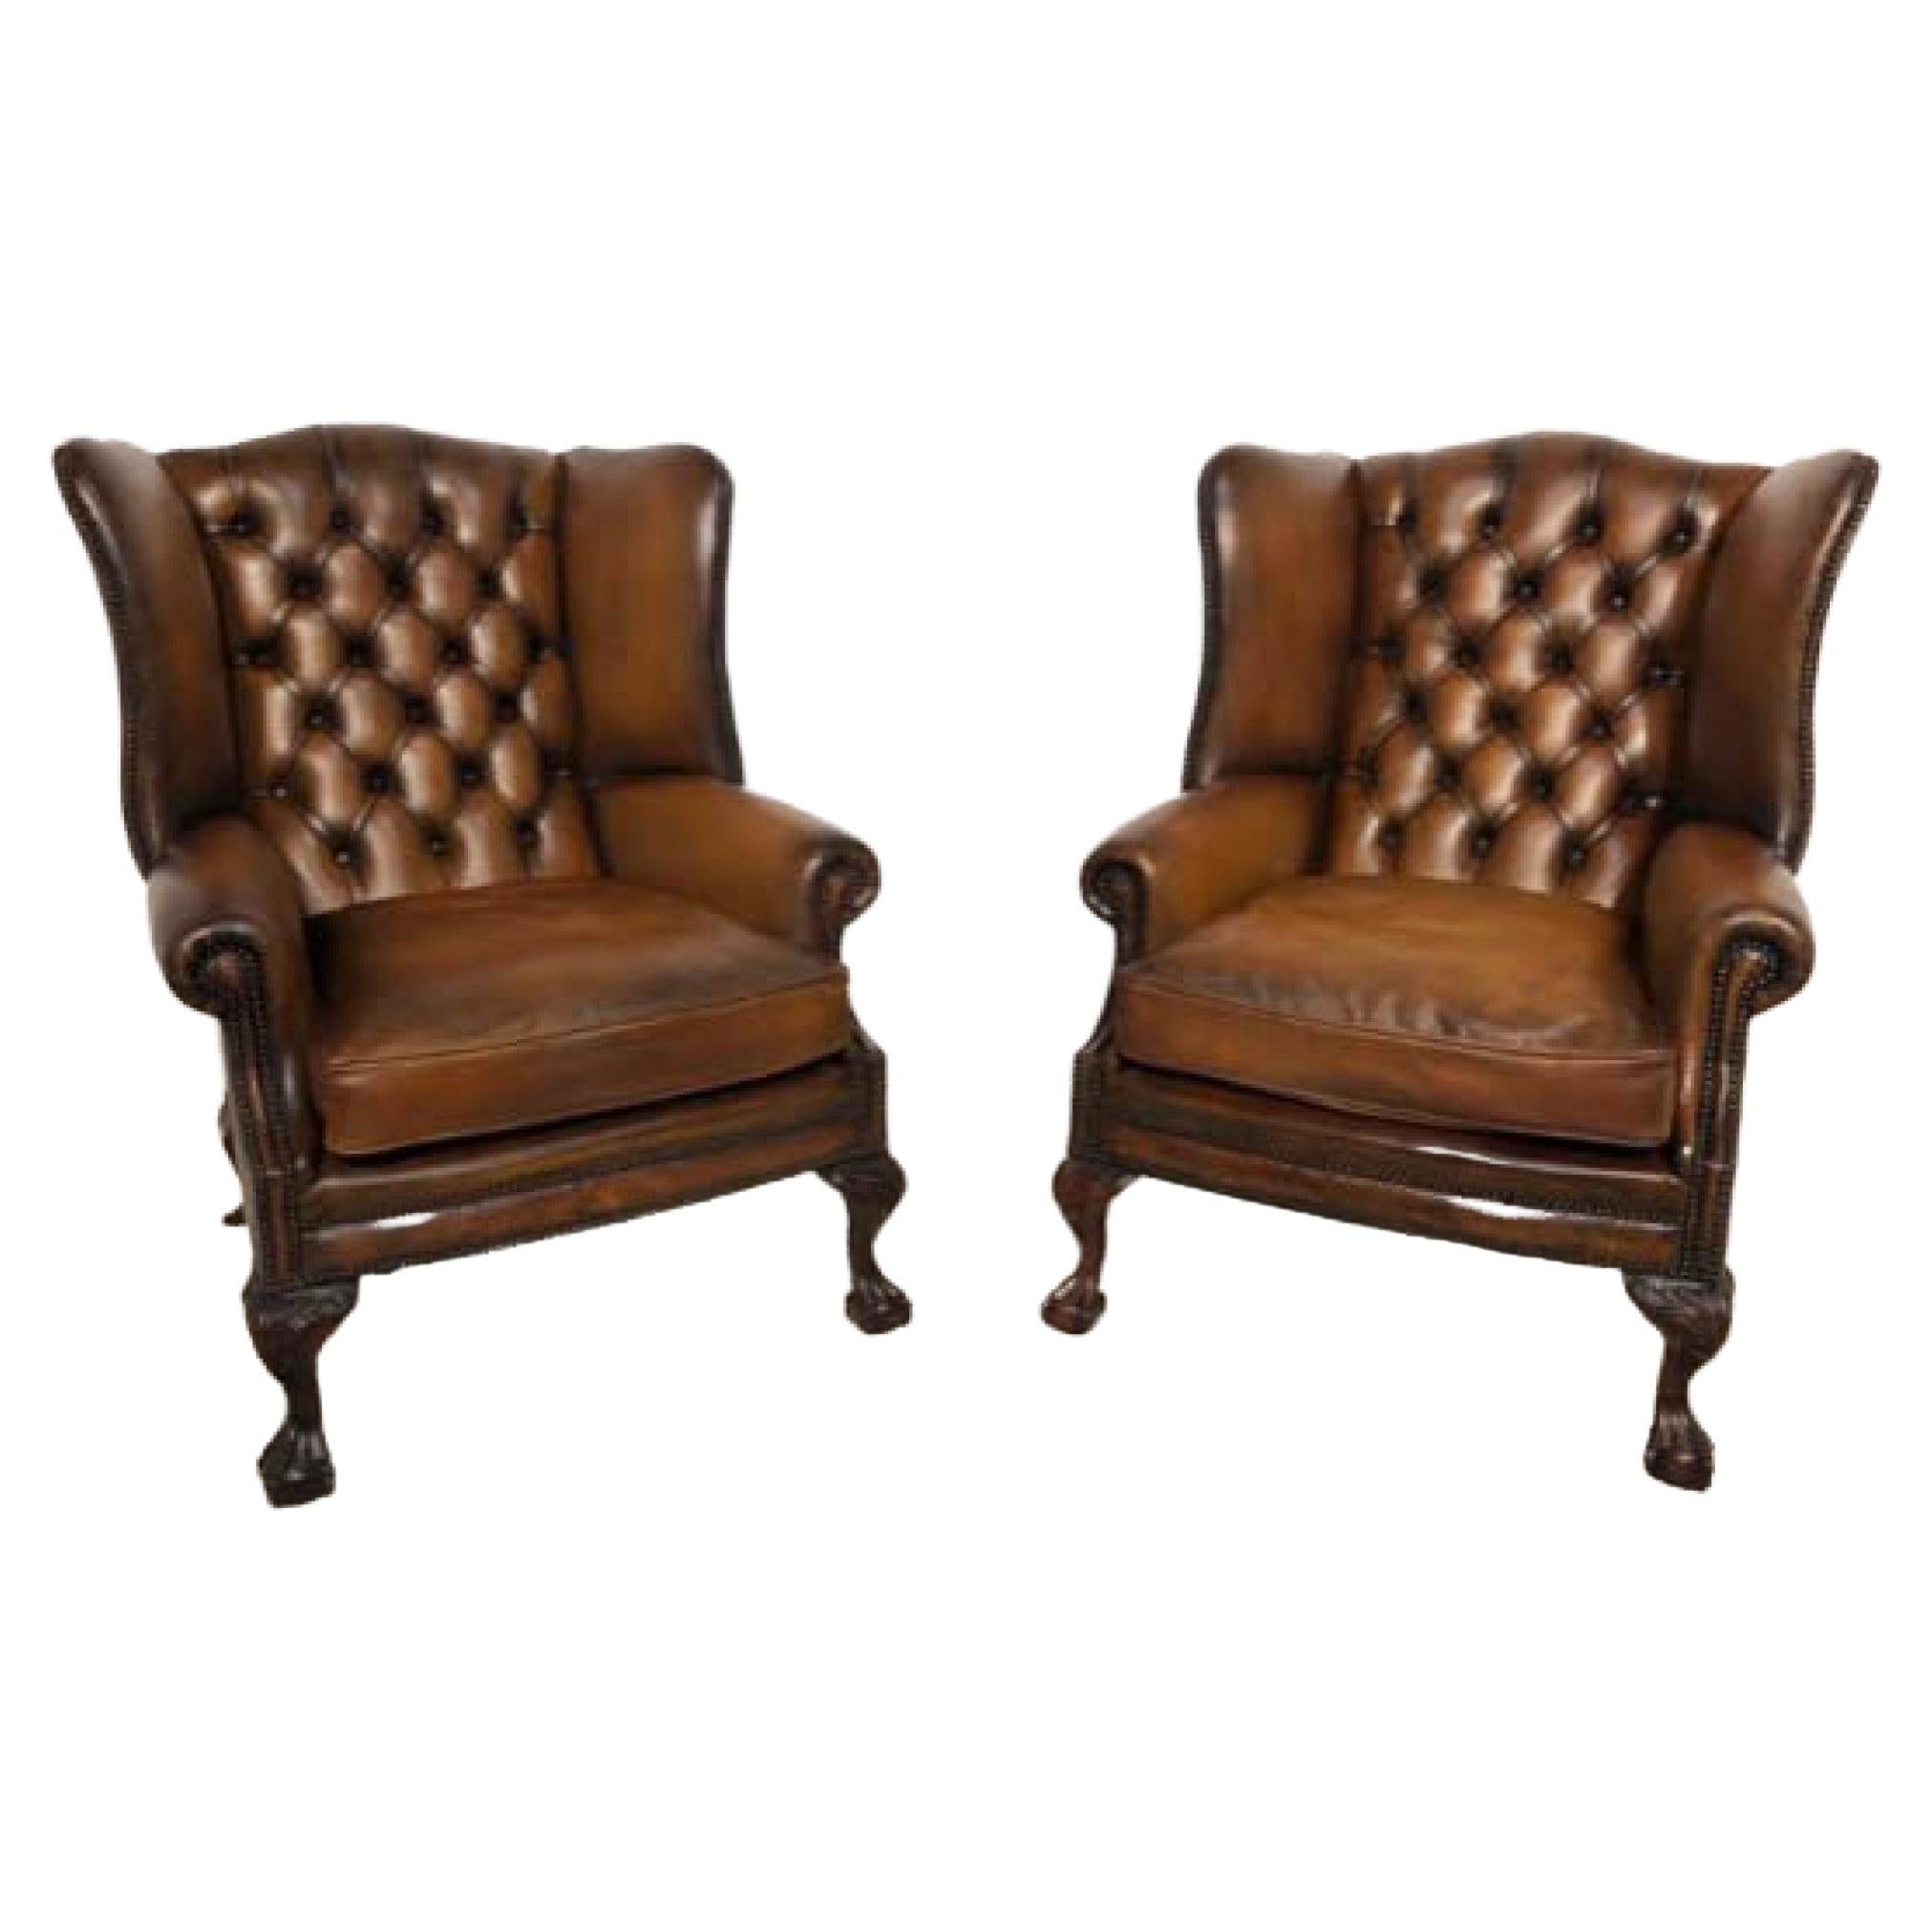 Pair Chesterfield Leather Chairs - Wingback Victorian Deep Button